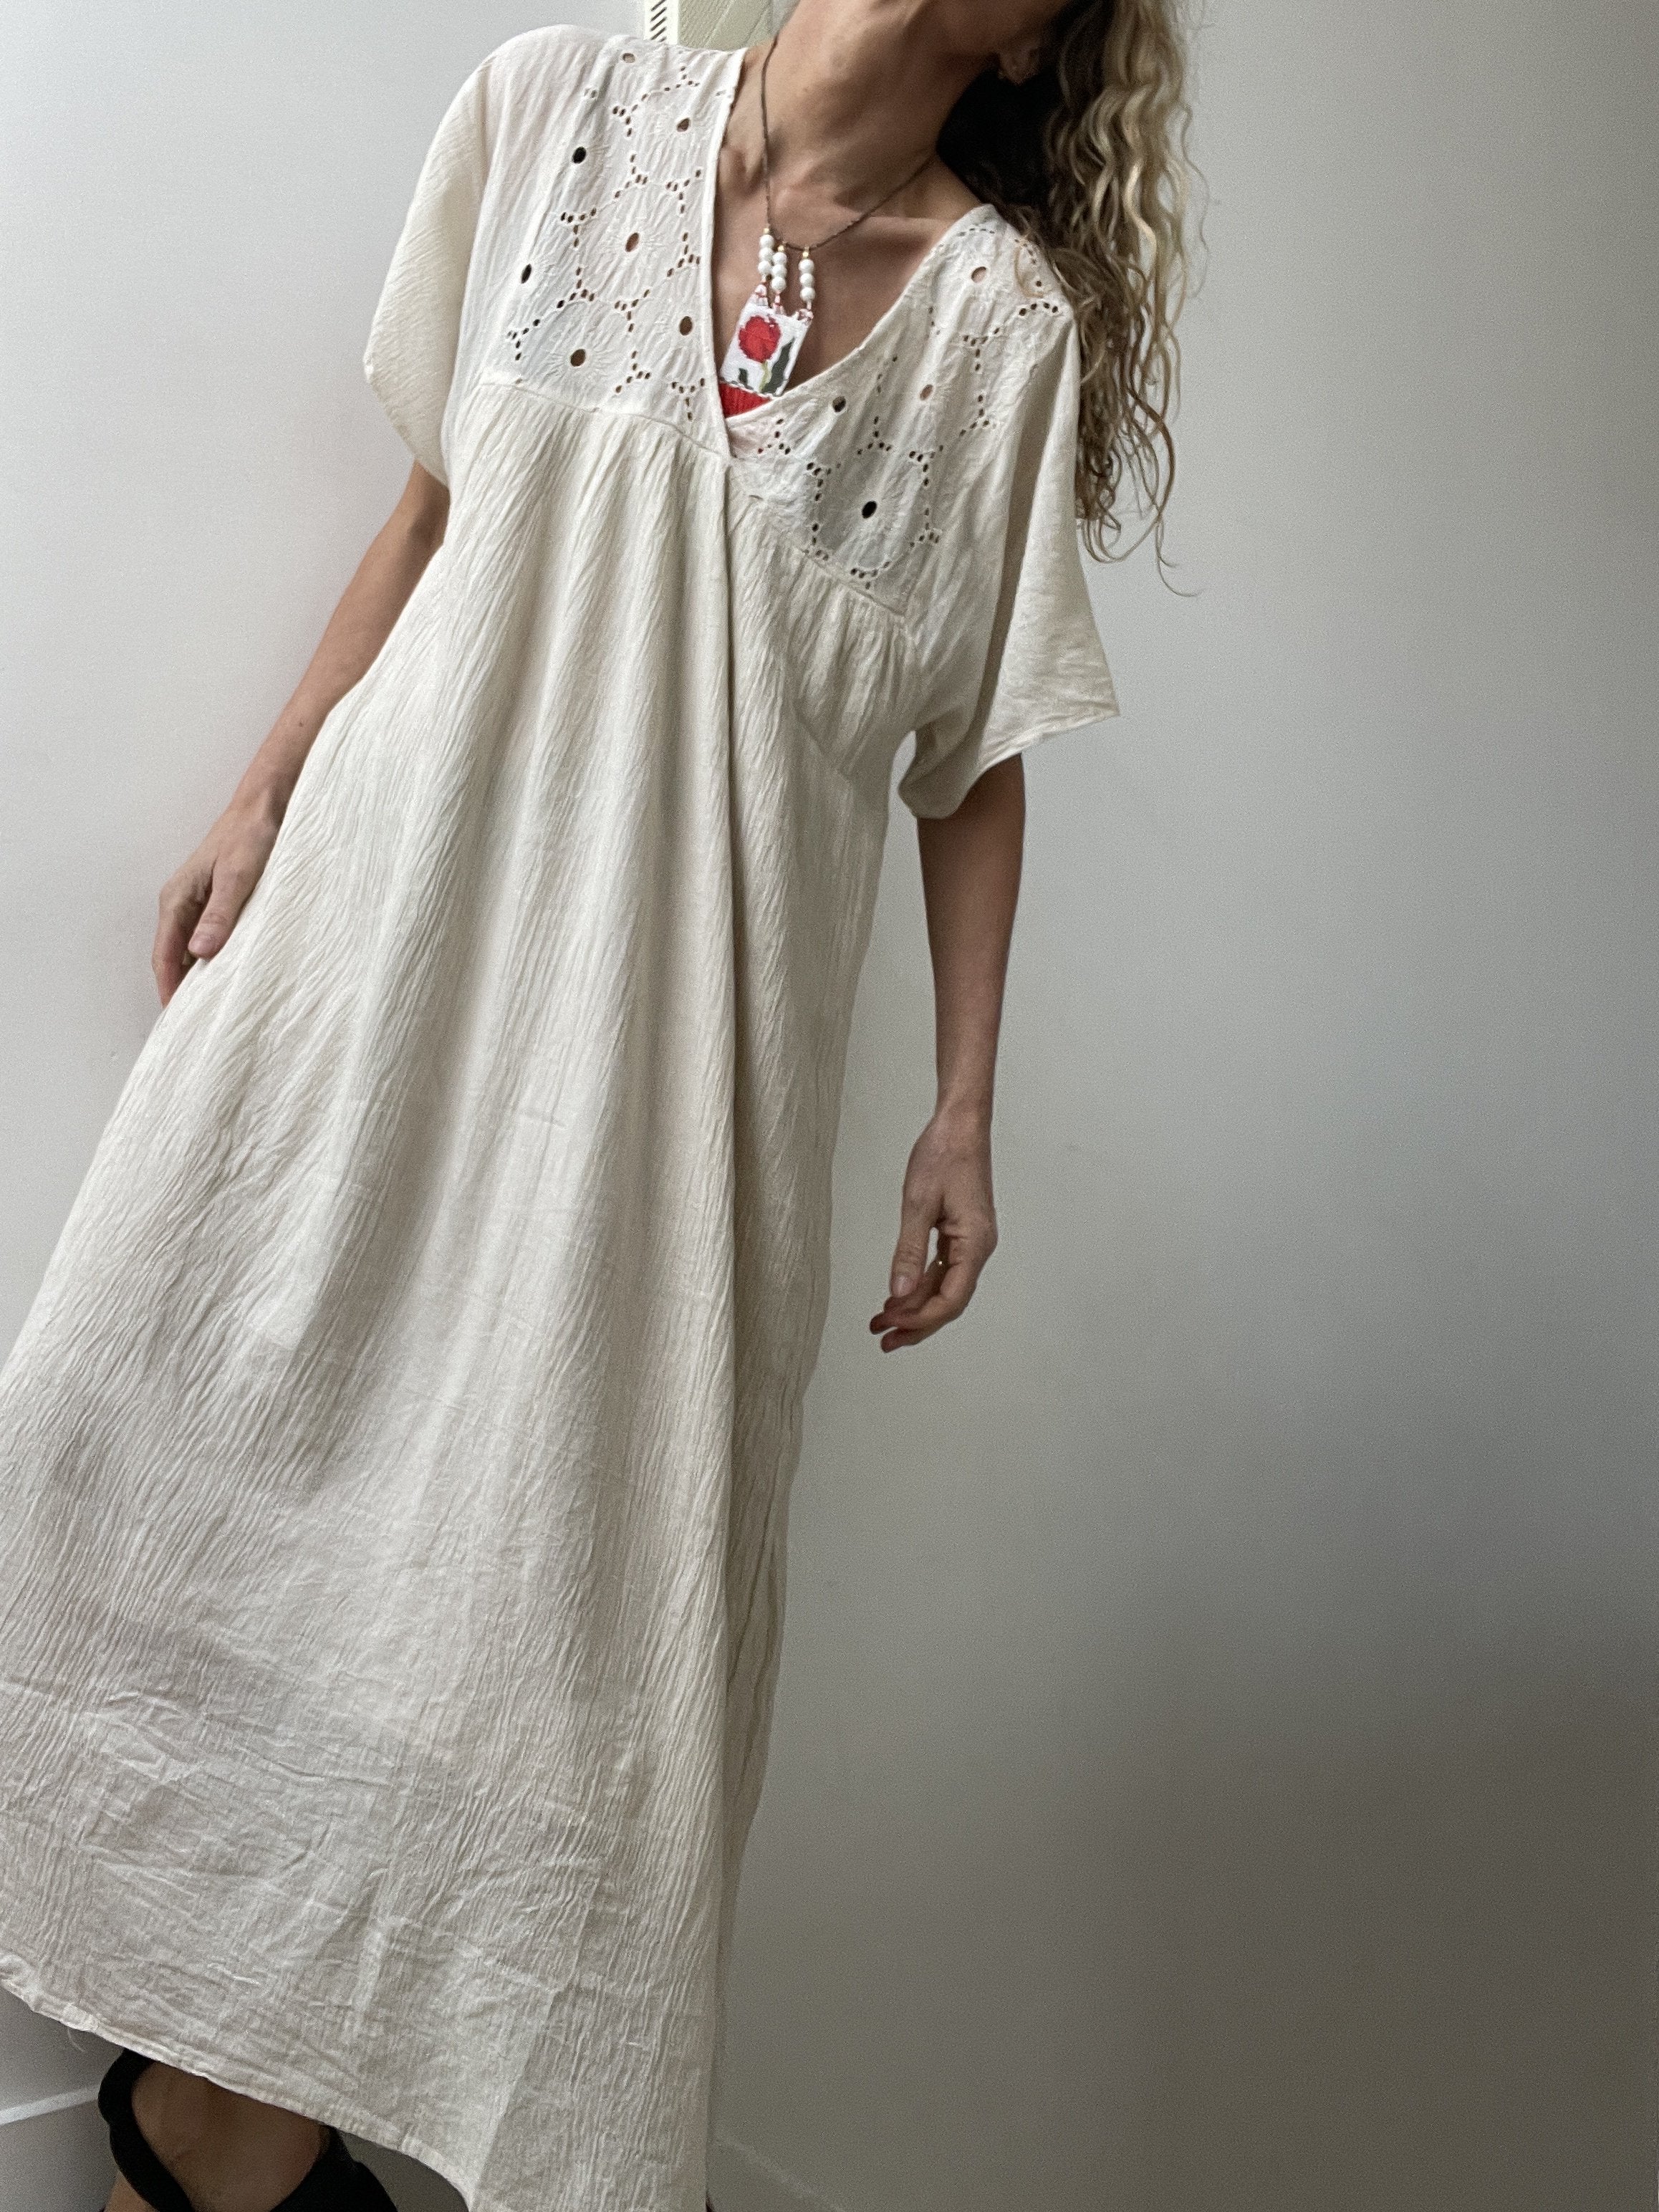 Not specified Dresses One Size Broderie Anglaise V Neck Dress Natural